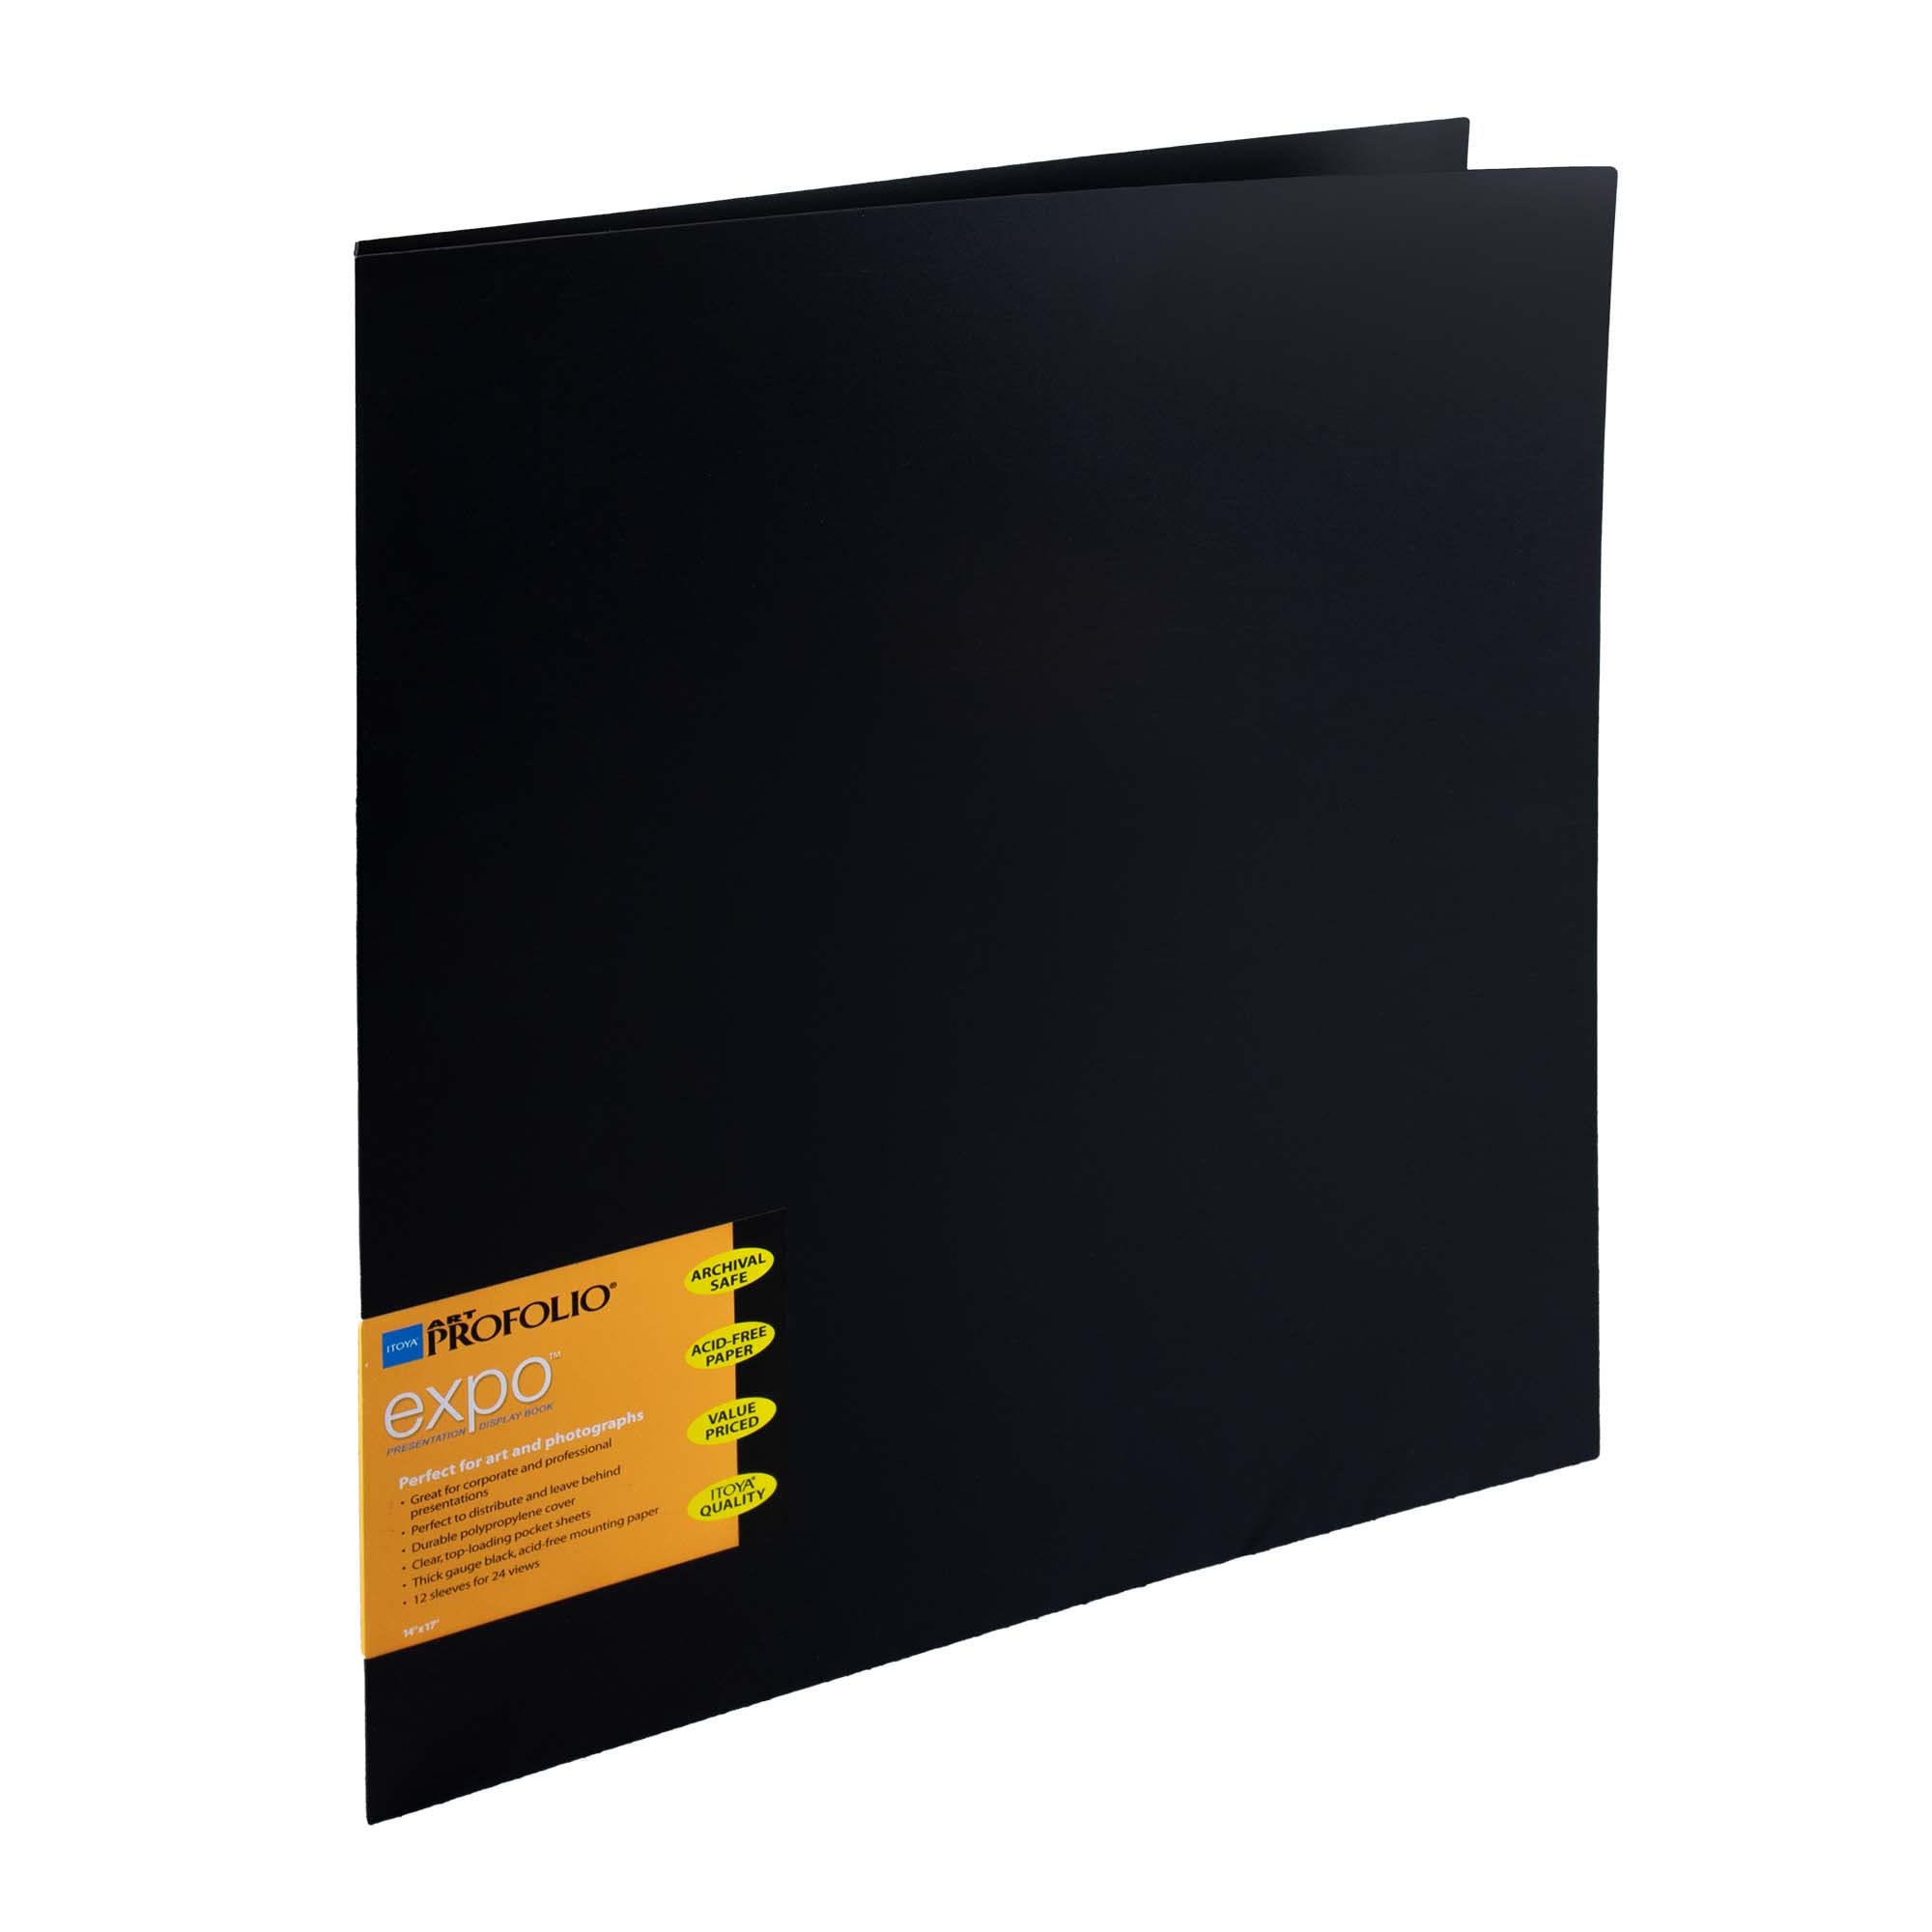 Itoya ProFolio Expo 14x17 Black Art Portfolio Binder with Plastic Sleeves  and 24 Pages - Portfolio Folder for Artwork with Clear Sheet Protectors -  Presentation Book for Art Display and Storage